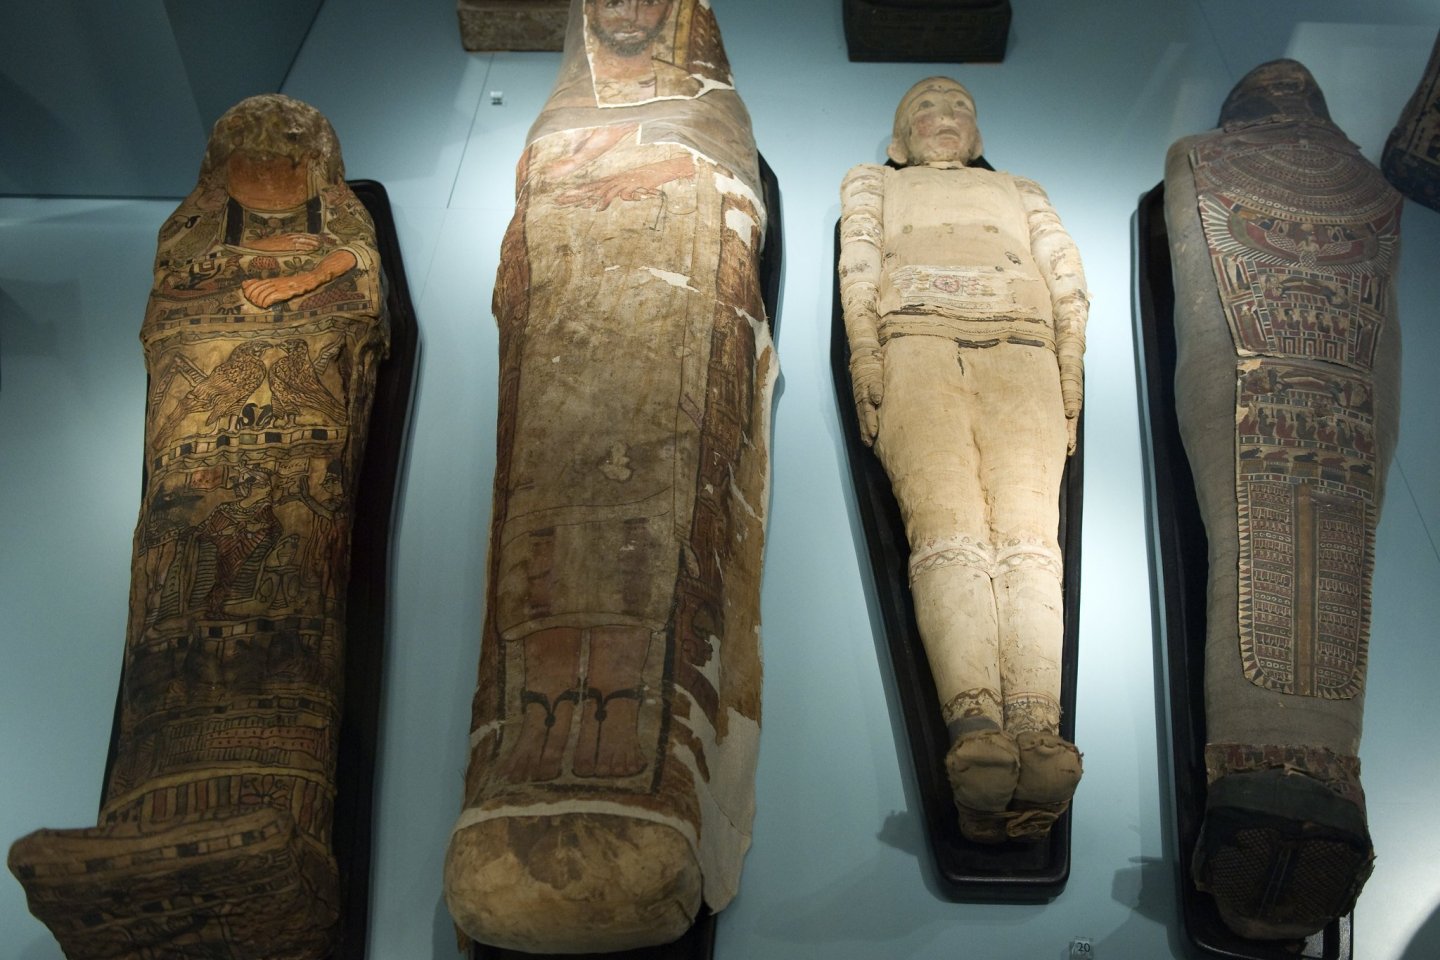 The event will explore mummies from different cultures, and why they were important